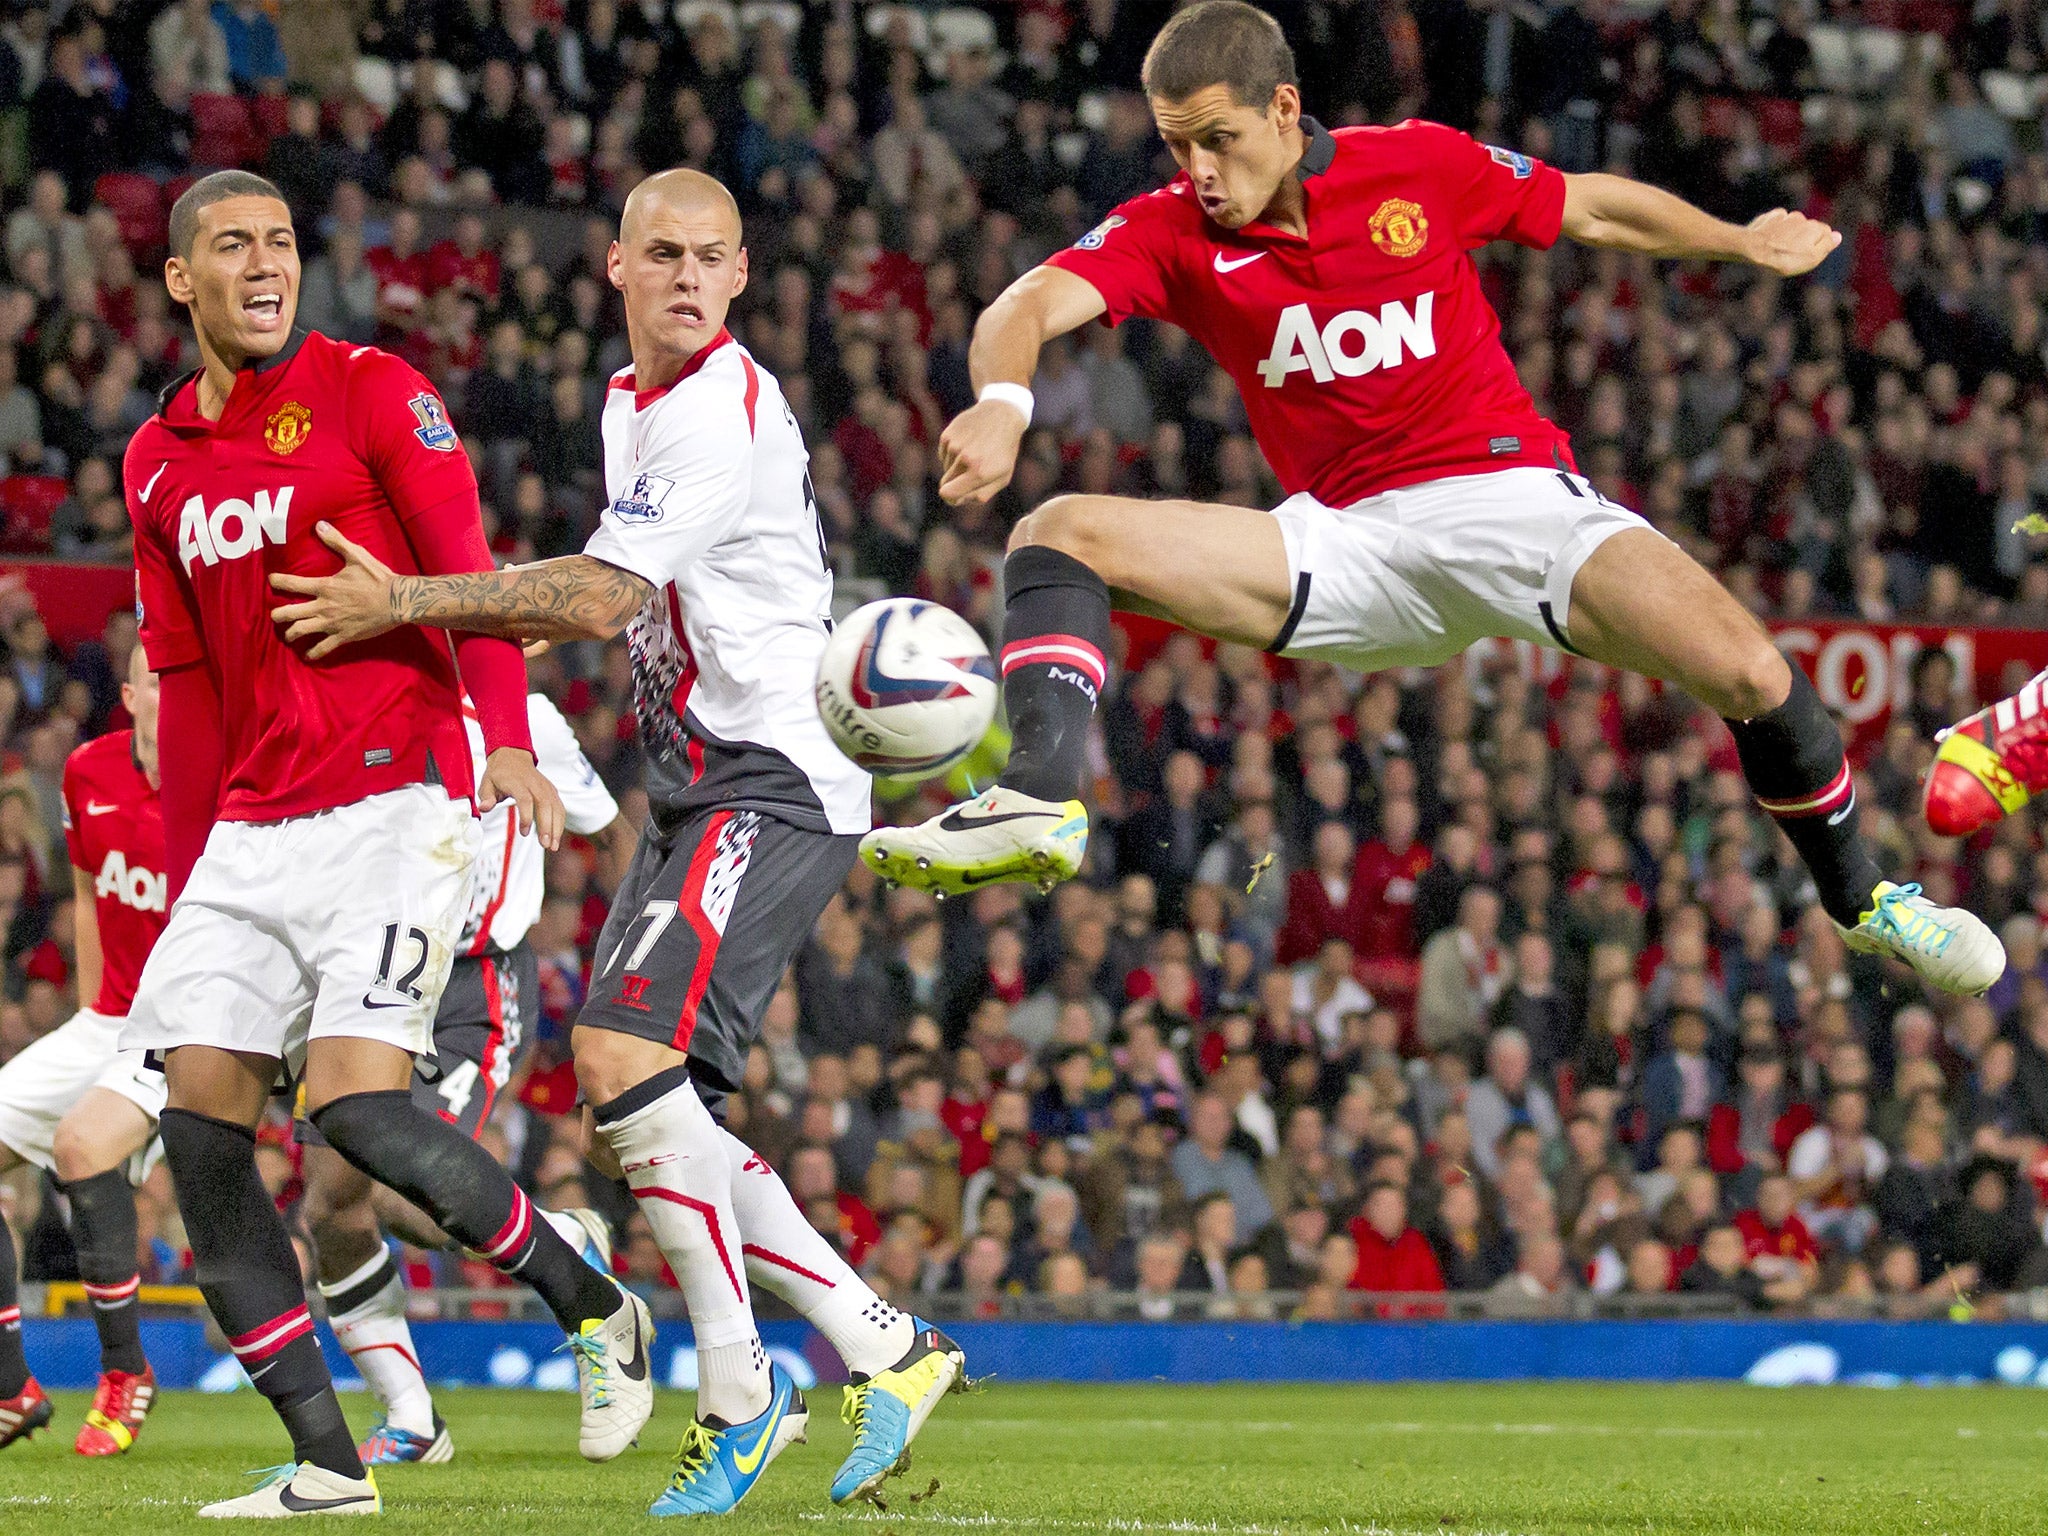 Javier Hernandez scored the game's only goal in the Capital One Cup win over Liverpool